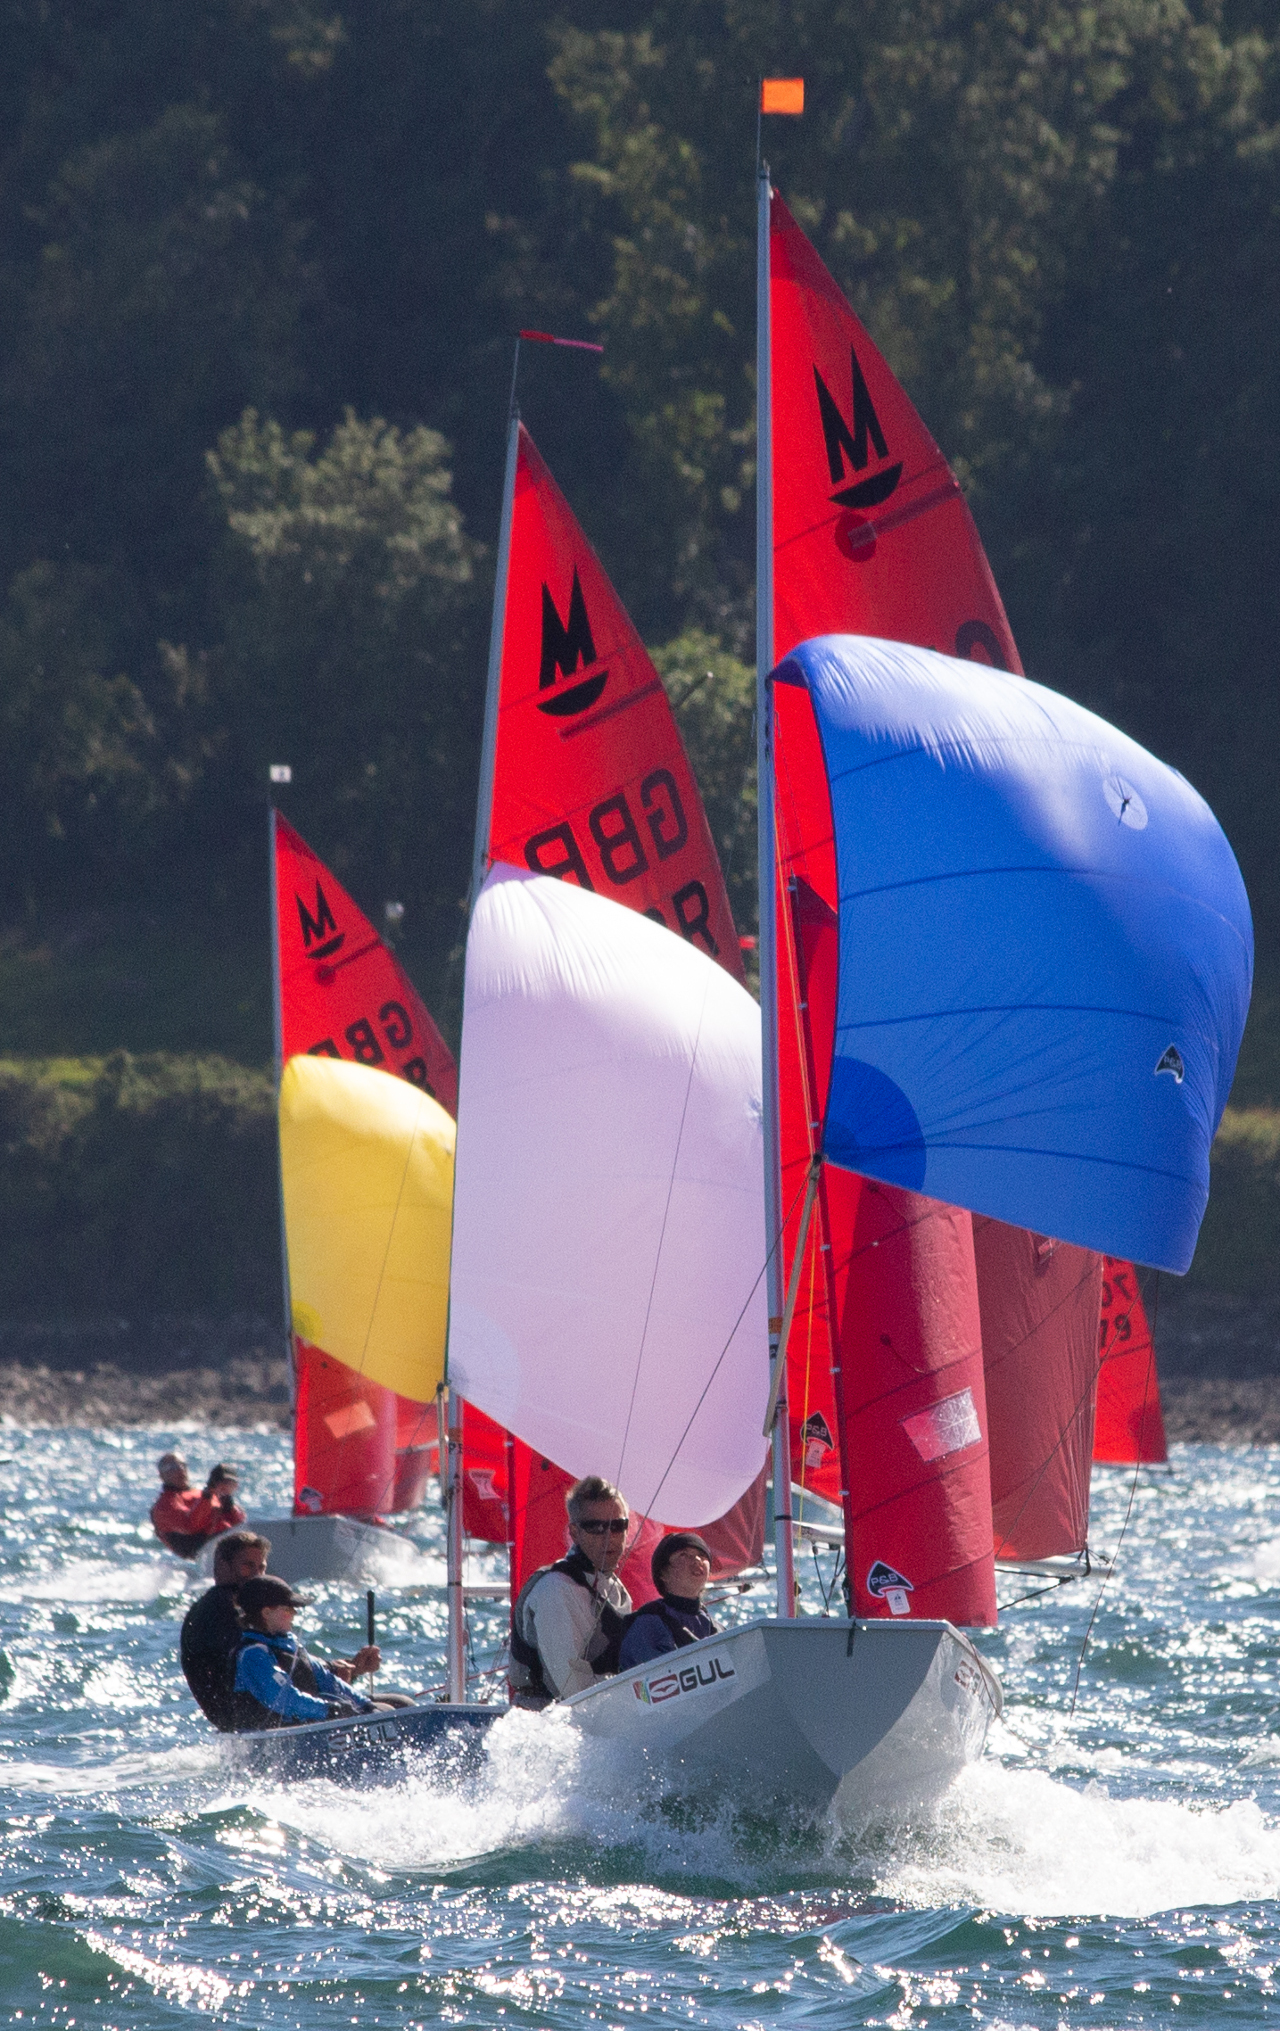 A fleet of Mirror dinghies with spinnaker set racing towards the camera on a broad reach